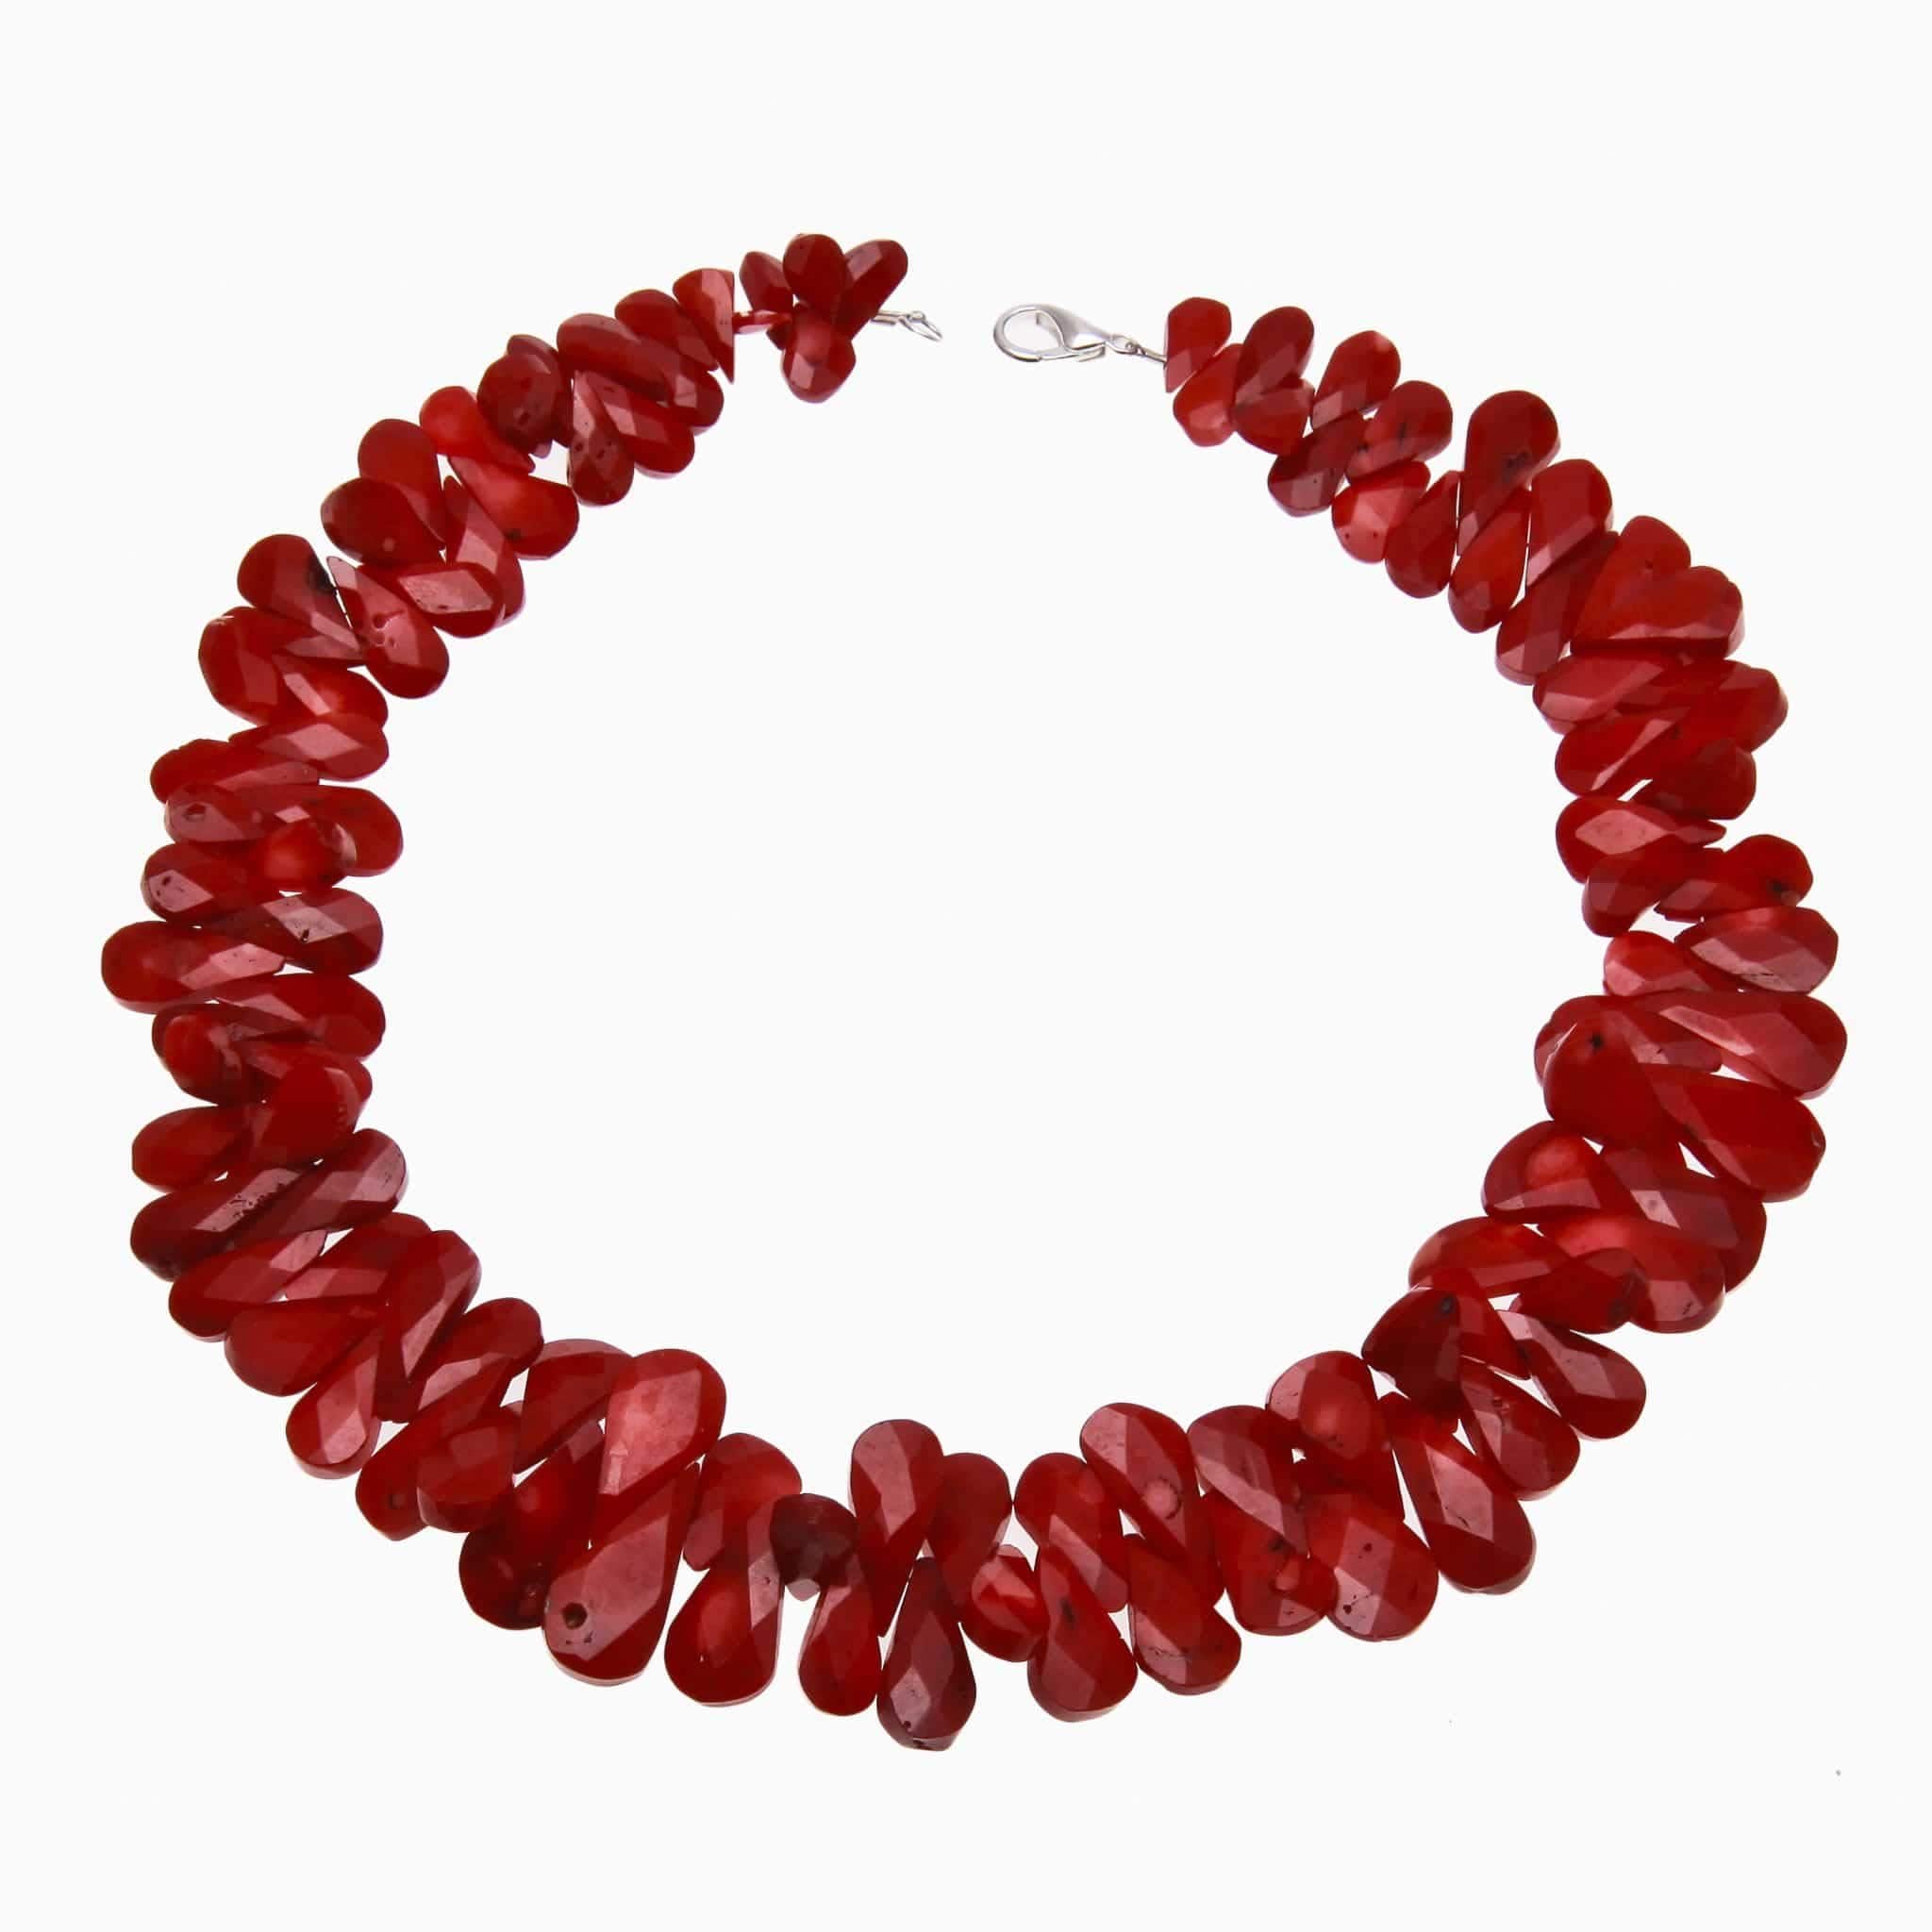 HONG BOCK-Bamboo coral necklace red. 45cm long.